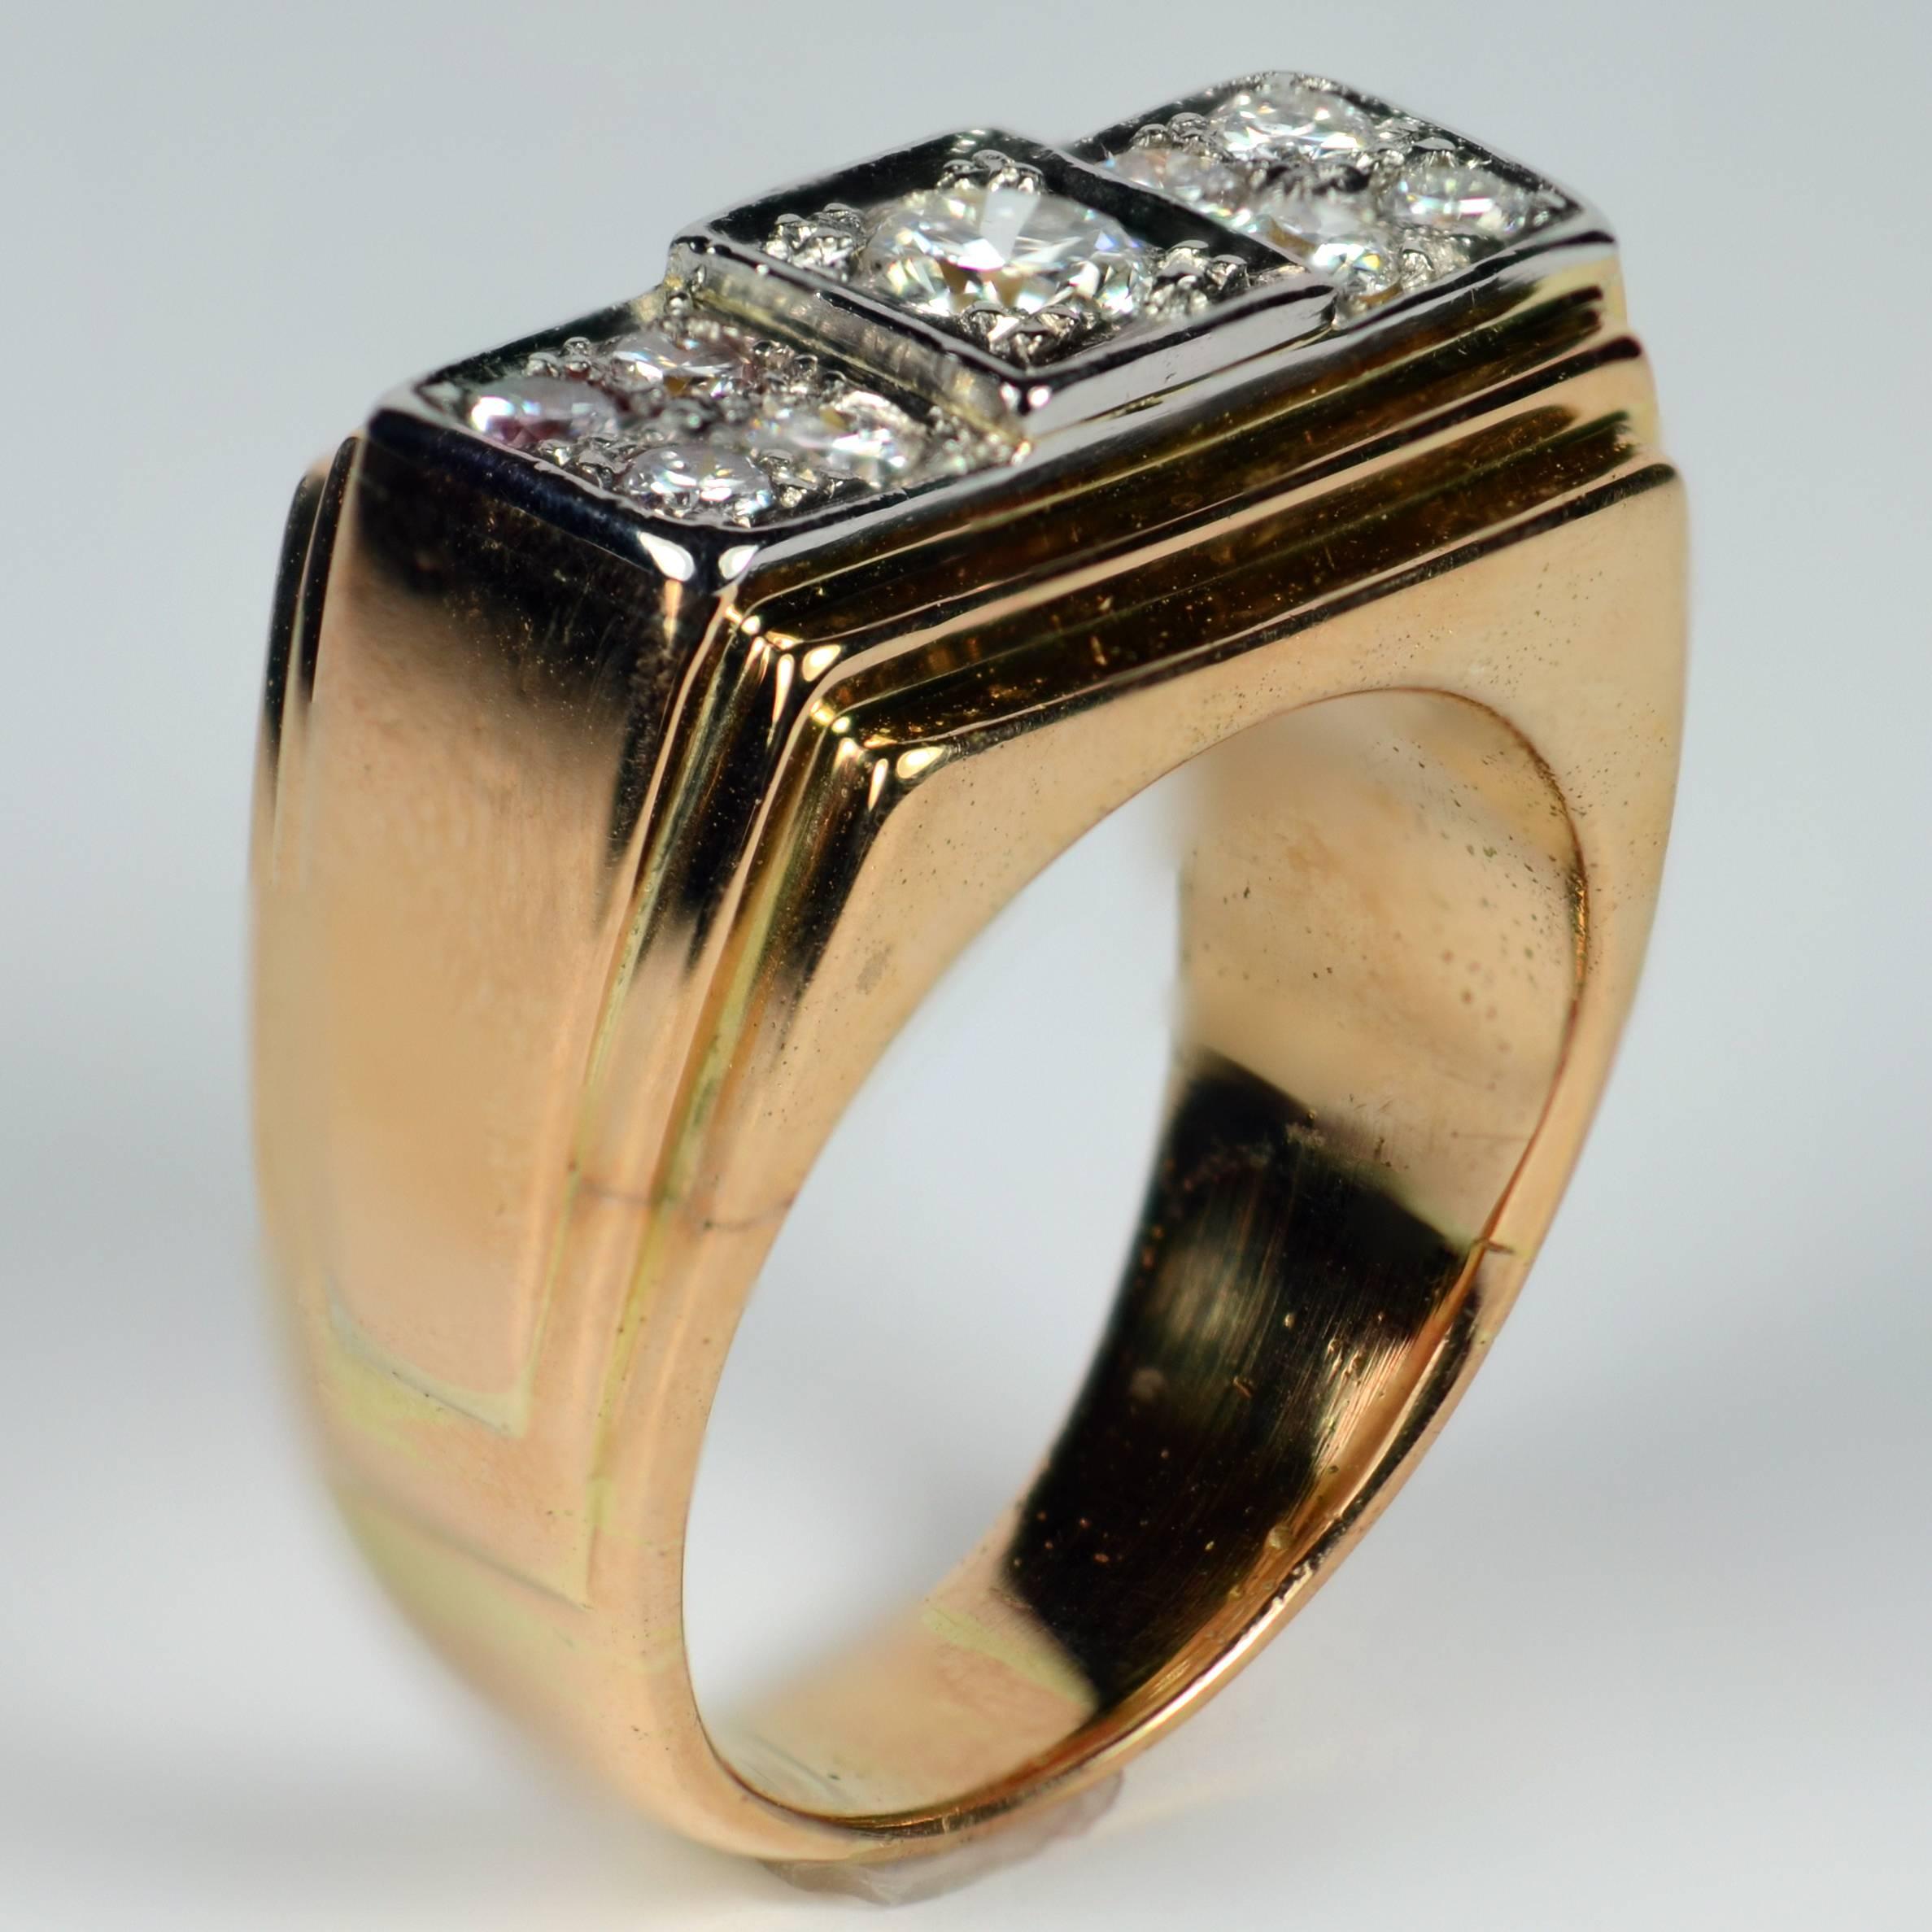 A very smart ring from the late Art Deco era with a stepped design in 18 carat rose gold and platinum, set with nine diamonds to the central section. The architectural feel of this ring is heightened by the stepped design to the tapered shank.

The